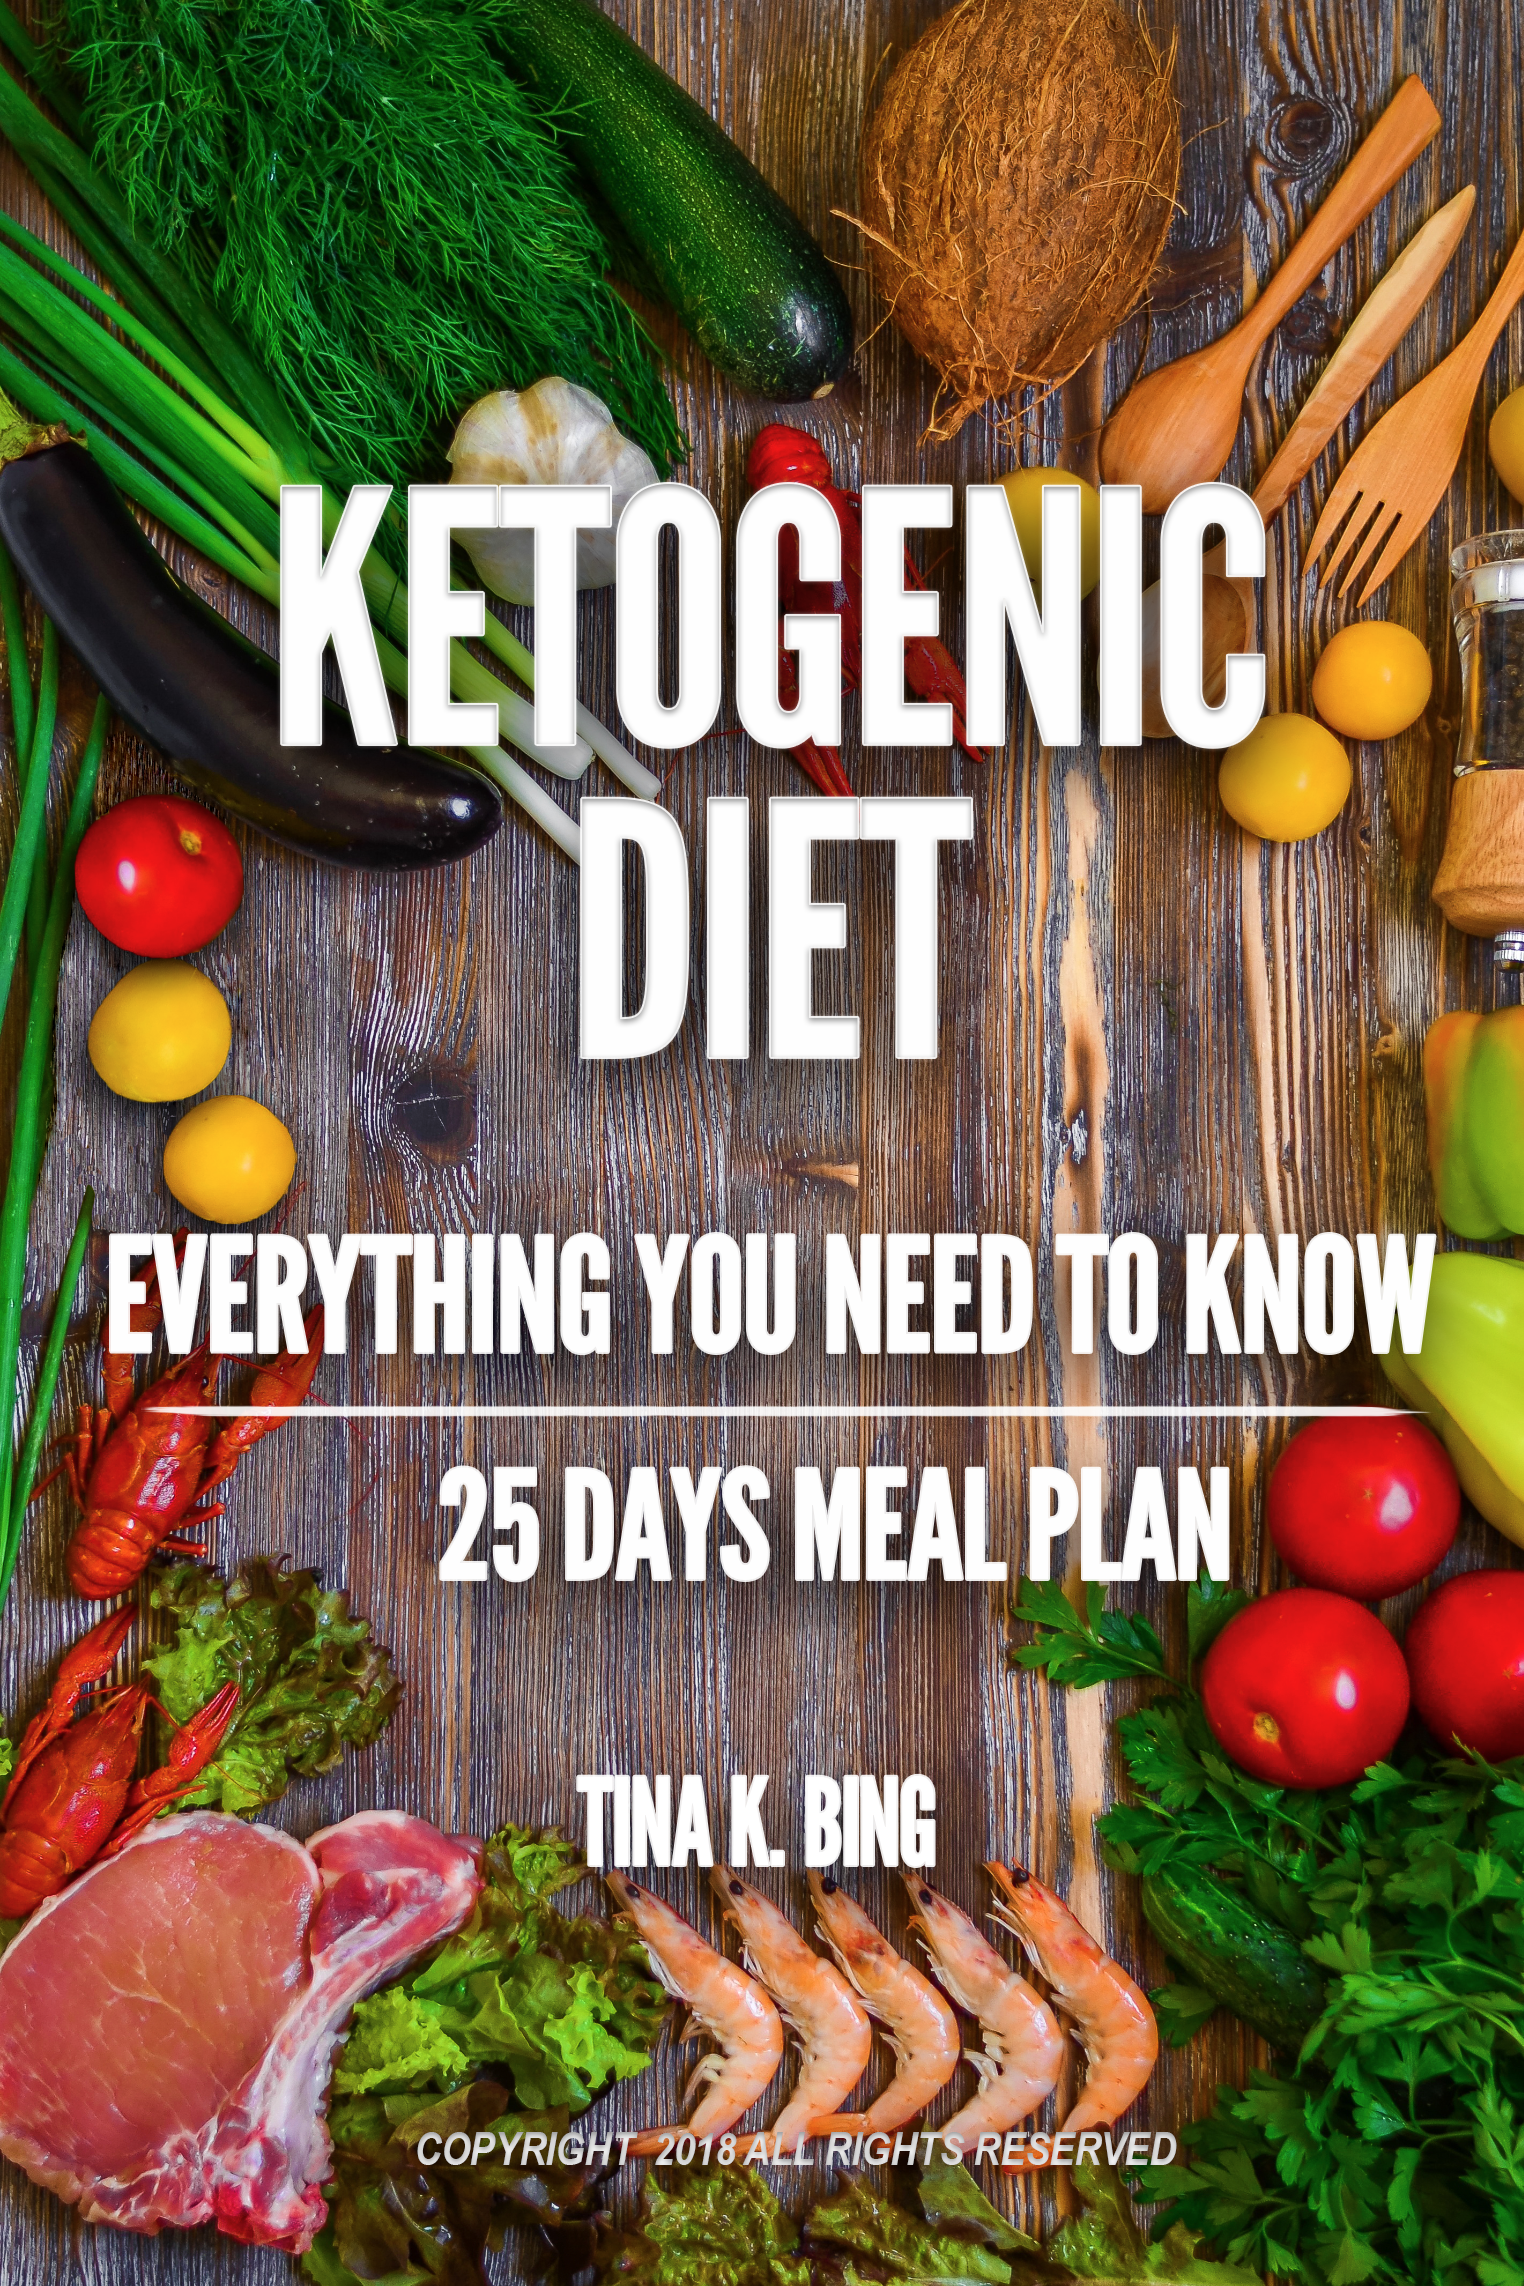 FREE: Ketogenic diet: Everything You Need to Know. by Tina K. Bing